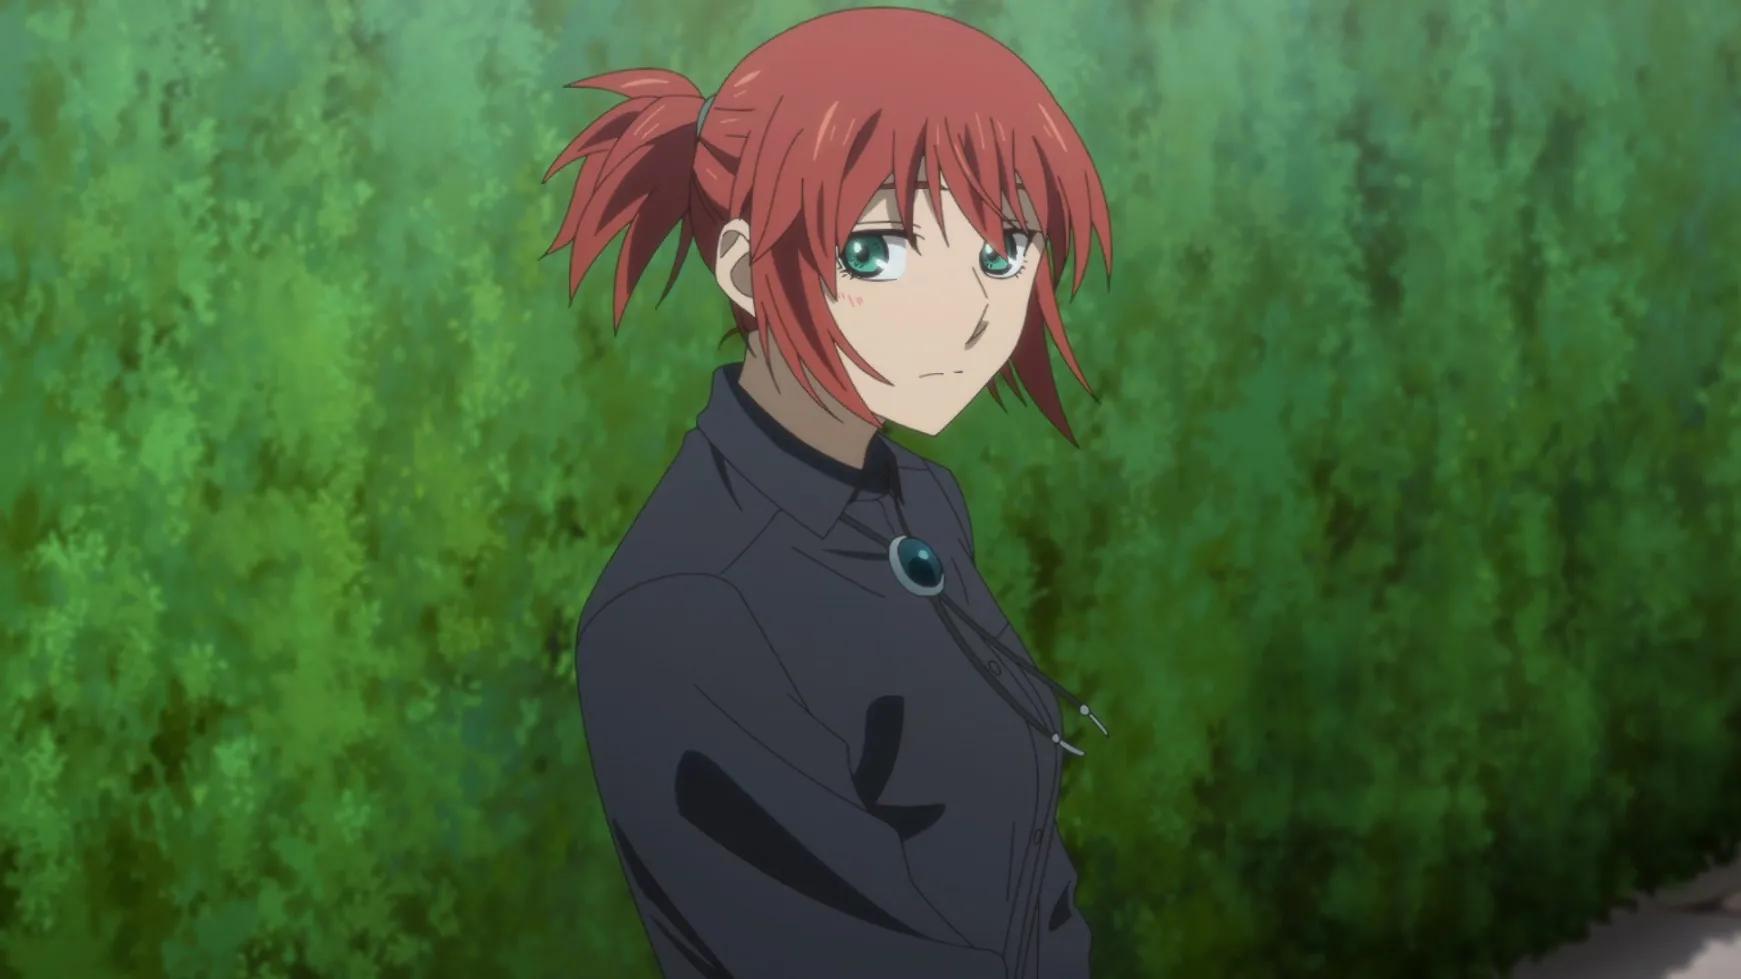 Who Is Chise In The Ancient Magus Bride?